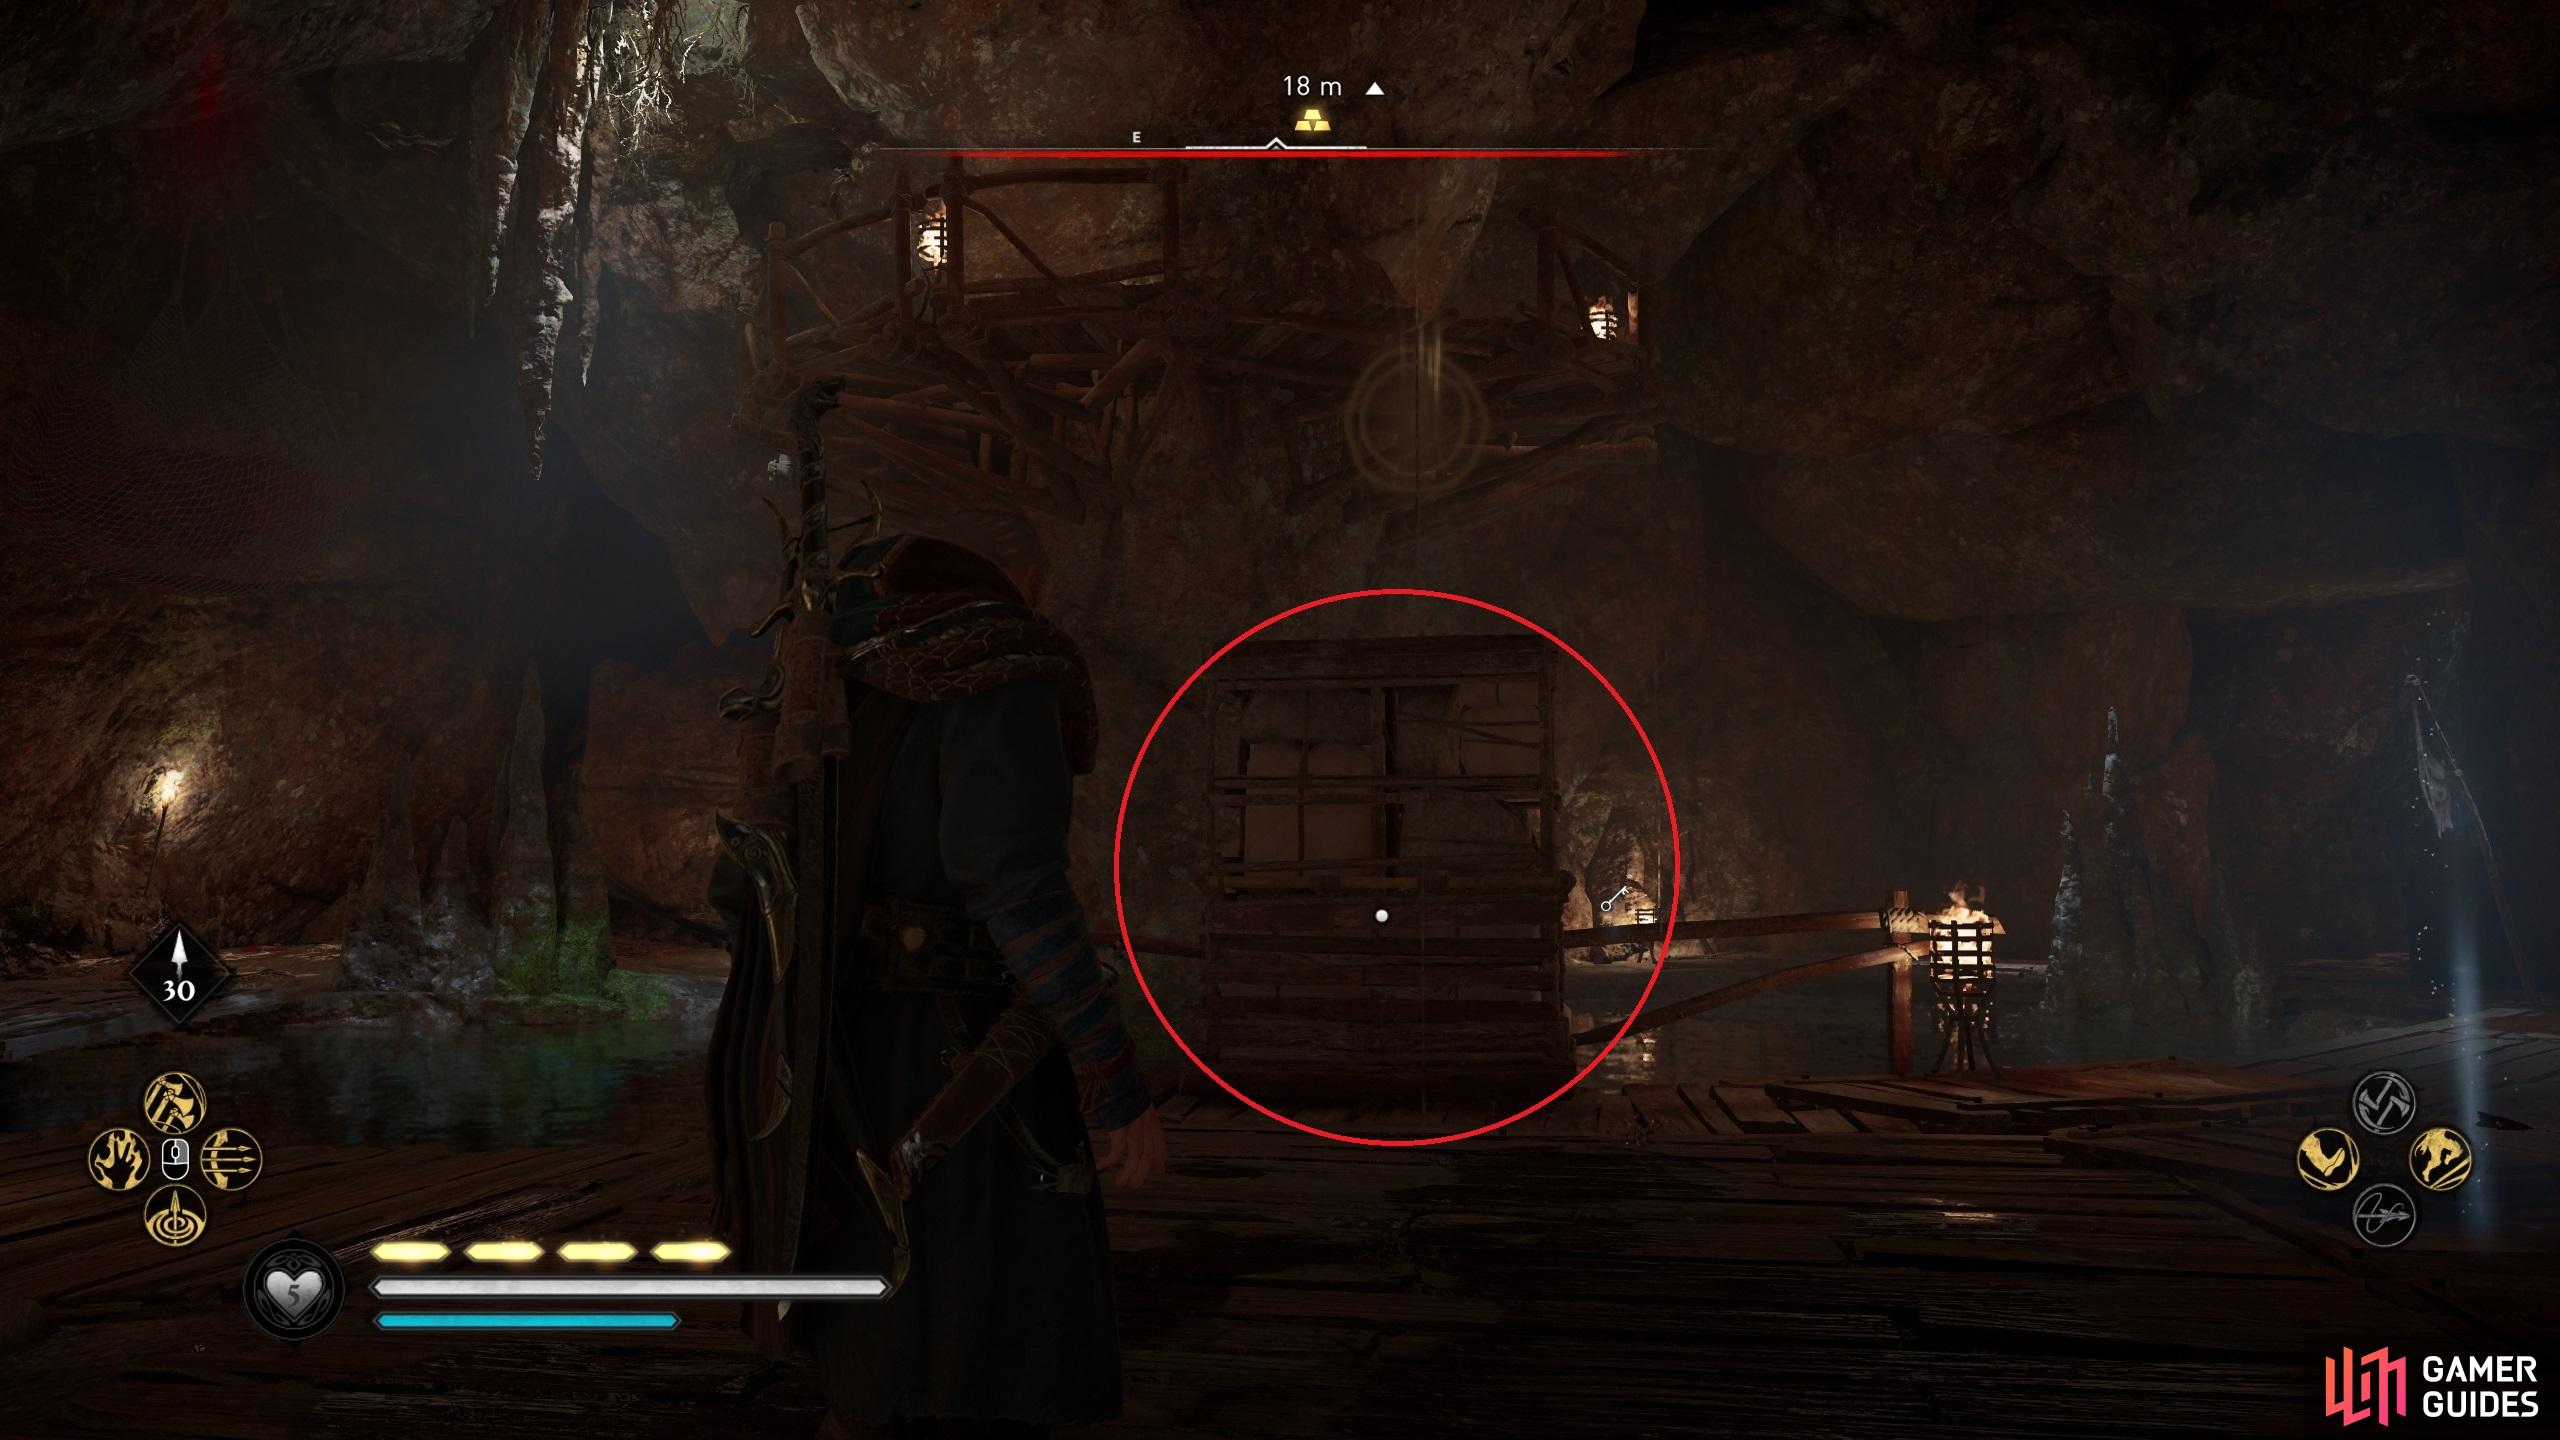 You'll find a movable barricade on the western side of the chamber. Use it to reach the wooden platform.